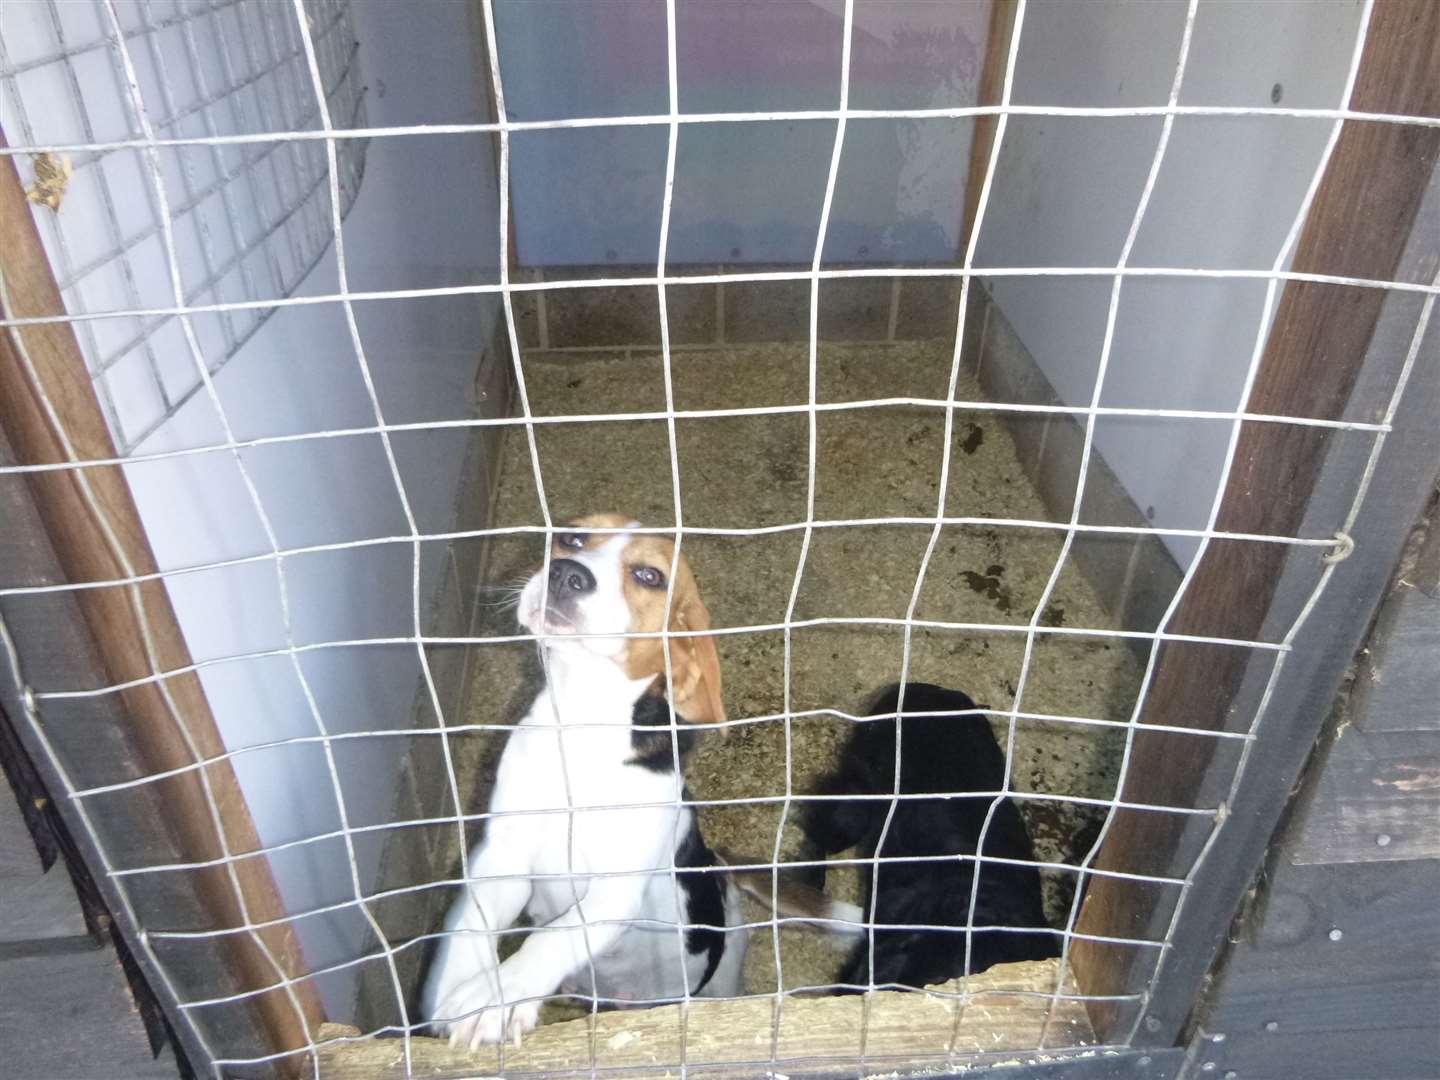 In total, 18 dogs, including spaniels, were seized from the Longfield property in 2018. Picture: RSPCA